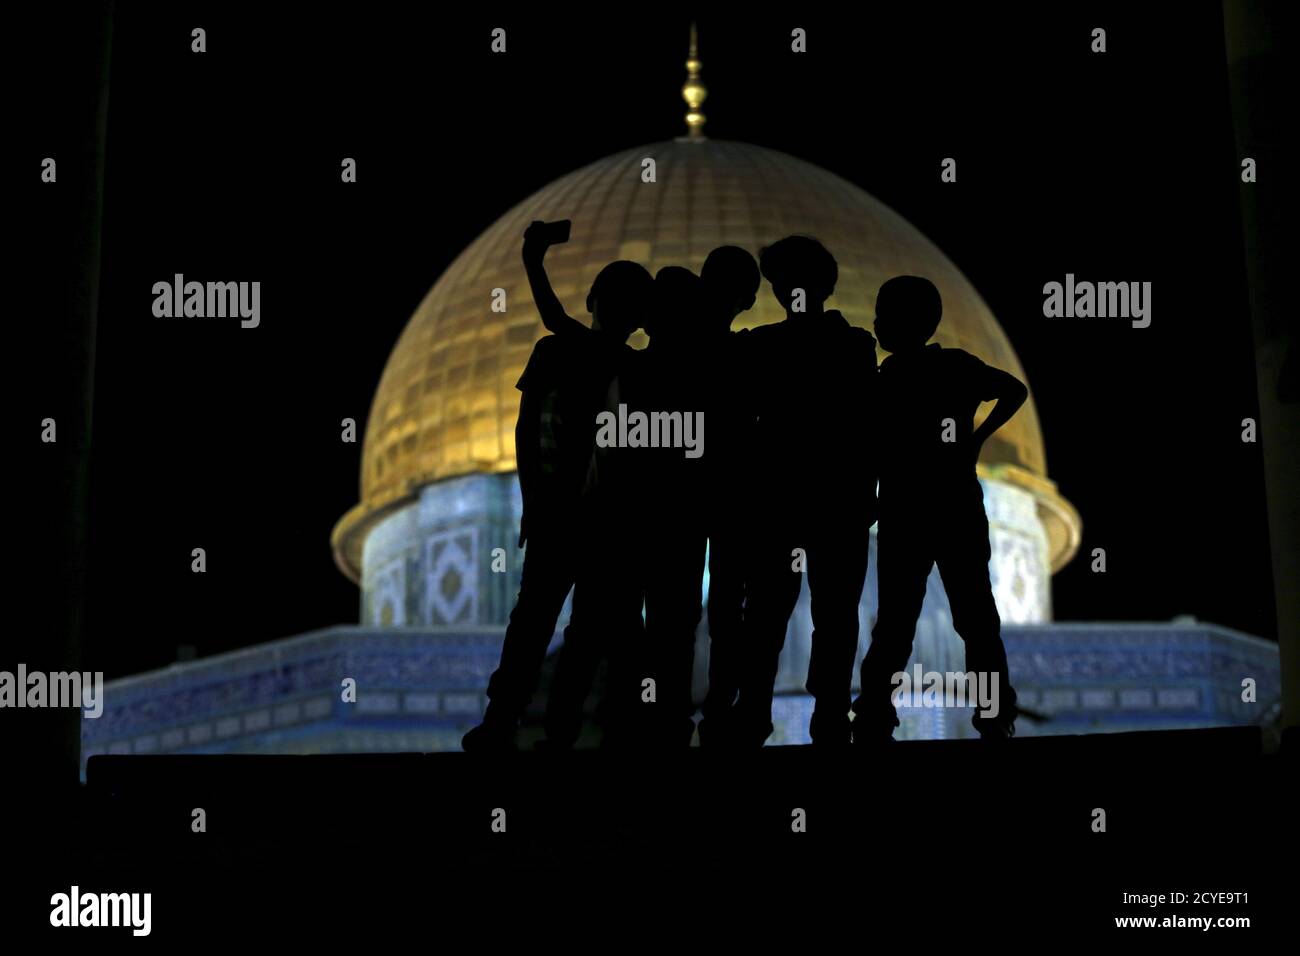 Palestinian Ali Souwan, 12, from the West Bank city of Hebron, takes a selfie photo with his friends in front of the Dome of the Rock on the compound known to Muslims as Noble Sanctuary and to Jews as Temple Mount, in Jerusalem's Old City, during the holy month of Ramadan, July 4, 2015. Souwan said he has not been to Al Aqsa in three years, and that he took the selfie to show his friends and so that he'll have a souvenir. Palestinians young and old have jumped on a trend for taking 'selfies' at Al Aqsa, the 8th century Muslim shrine in Jerusalem, both as a personal memento and for relatives pr Stock Photo